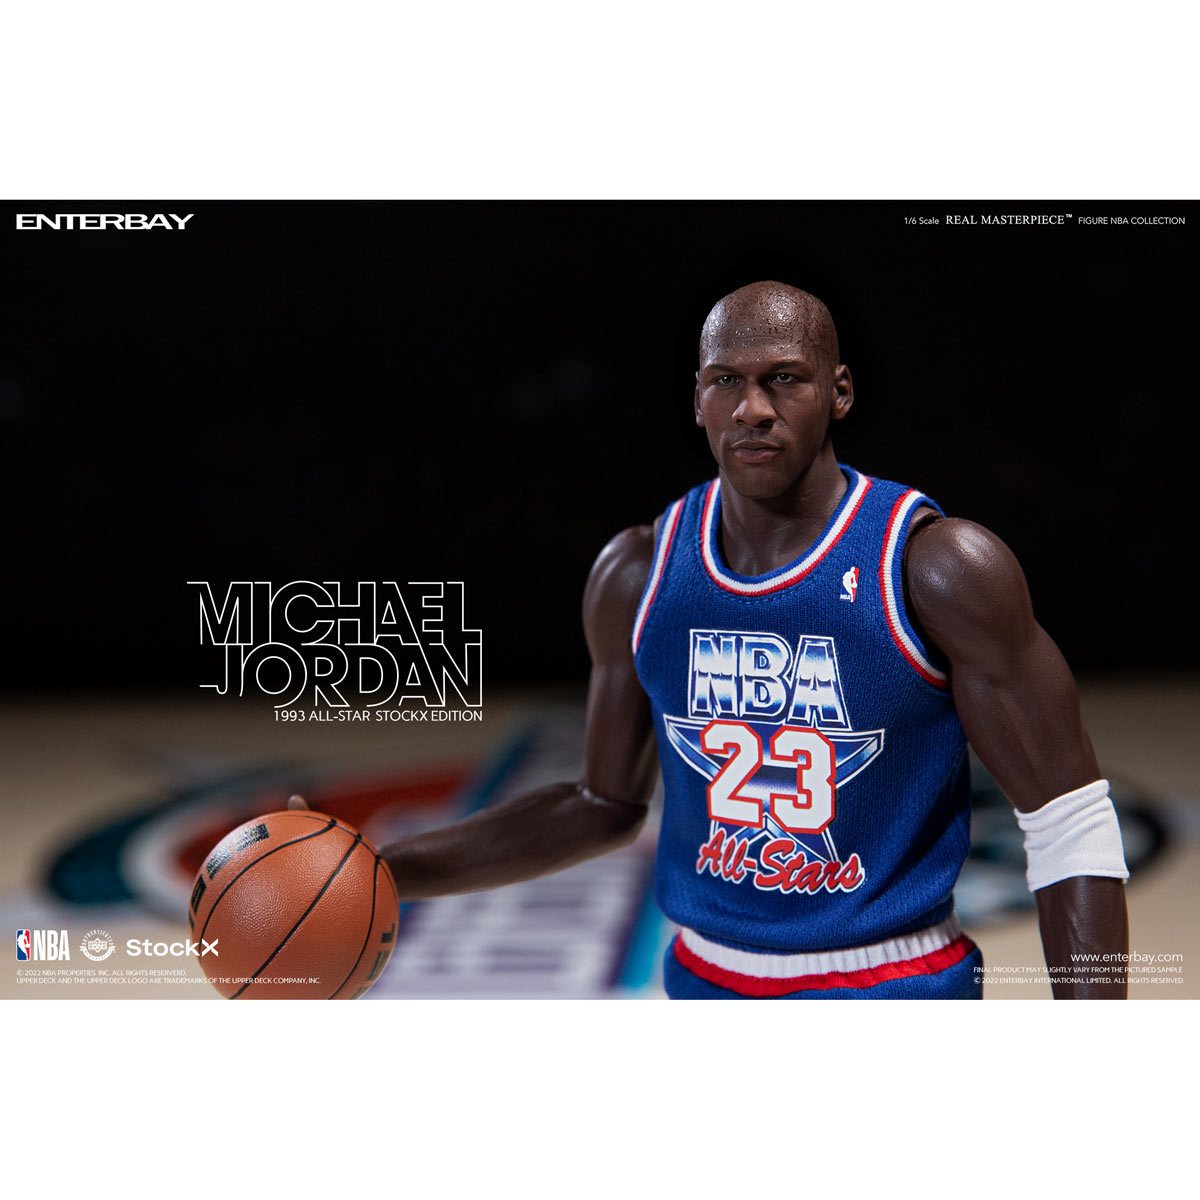 DropX™ Exclusive: Enterbay Michael Jordan All-Star 1993 Edition 1/6 Real  Masterpiece Action Figure (Limited Edition 1500 Sets) - FW22 - US